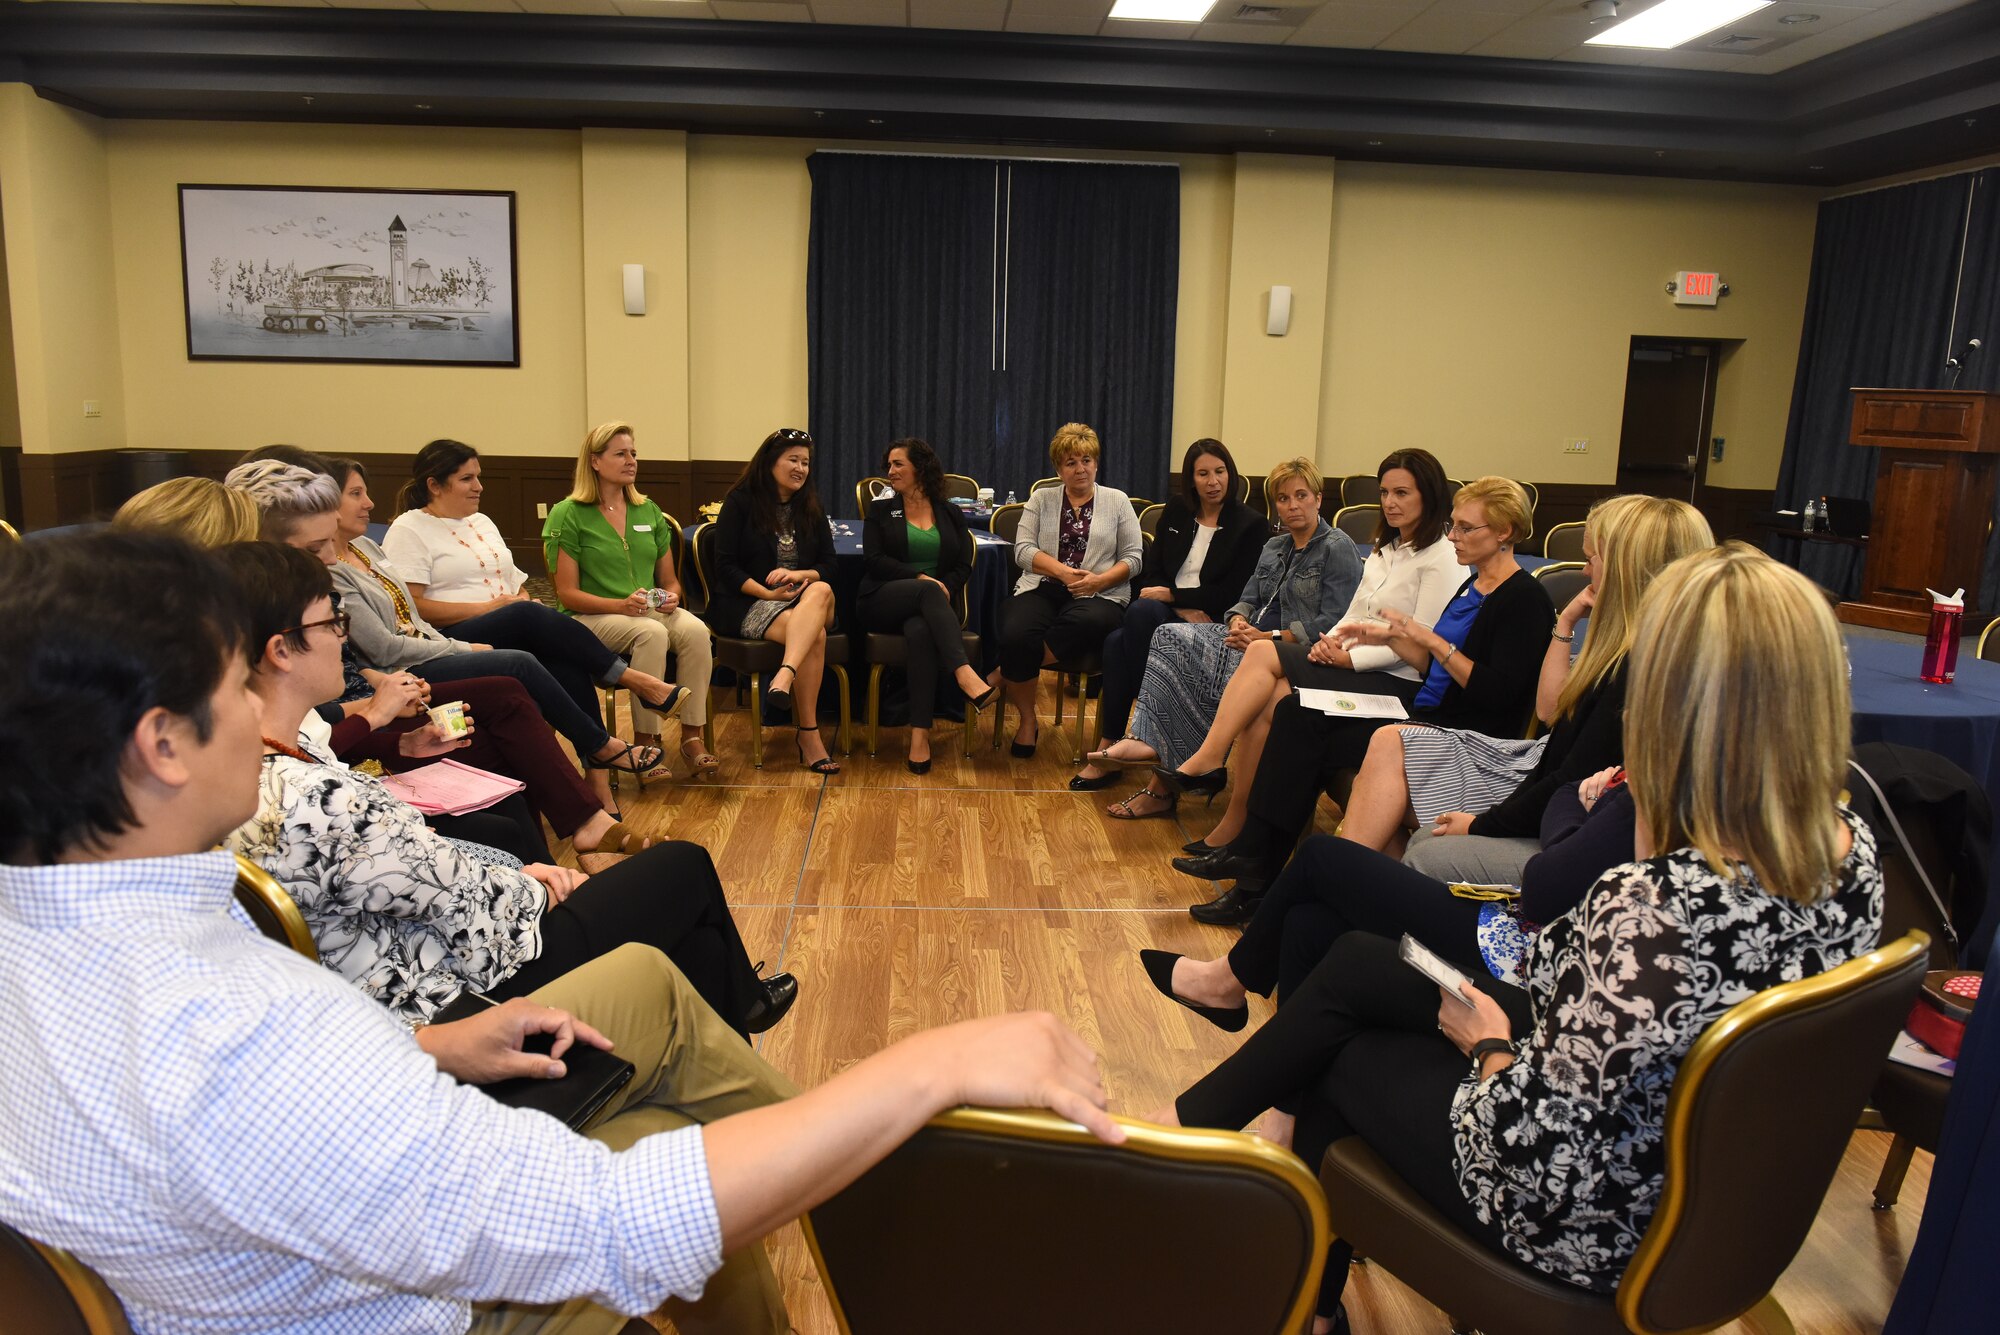 Key Spouse Program members participate in a circle discussion to share and discuss ideas to better communicate with spouses at their respective squadrons during a conference at Fairchild Air Force Base, Washington, Aug. 30, 2018. Key spouses are appointed and trained to serve   as a conduit for spouses on behalf of the unit commander. (U.S. Air Force photo/Airman 1st Class Lawrence Sena)